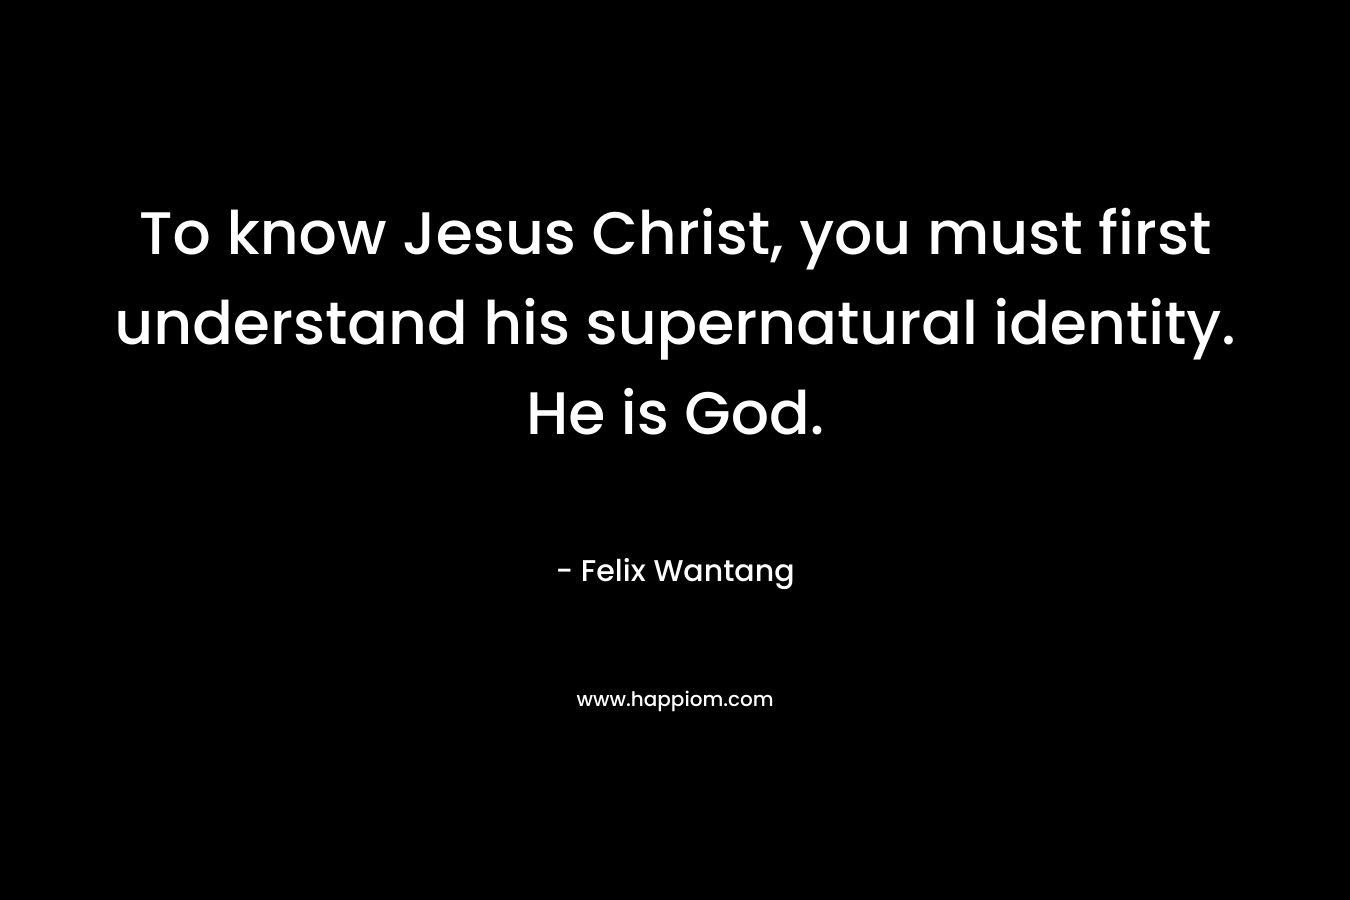 To know Jesus Christ, you must first understand his supernatural identity. He is God.